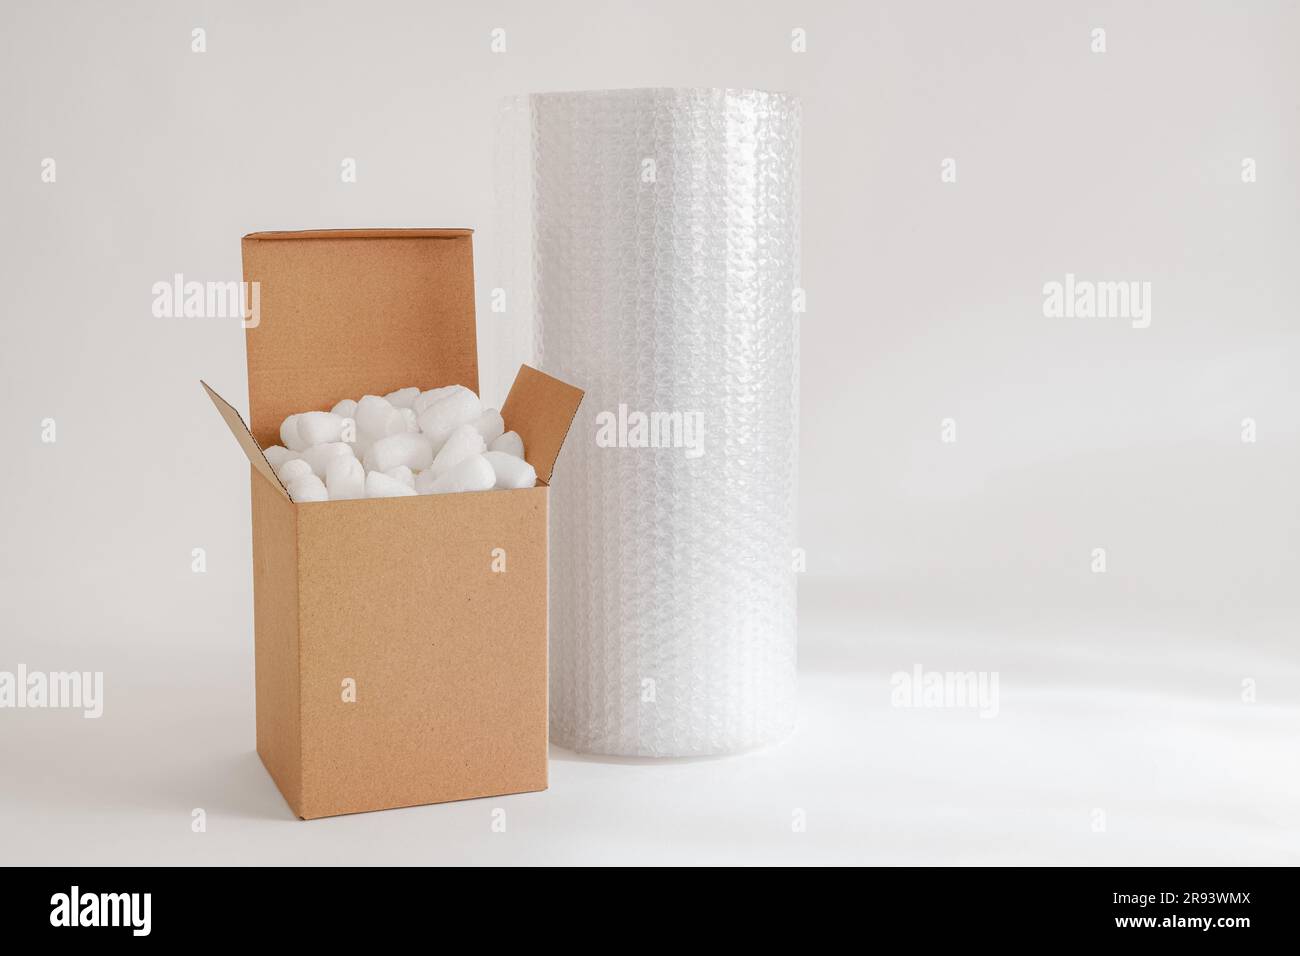 Cardboard box isolated on the white background filled with packing peanuts and bubble wrap Stock Photo